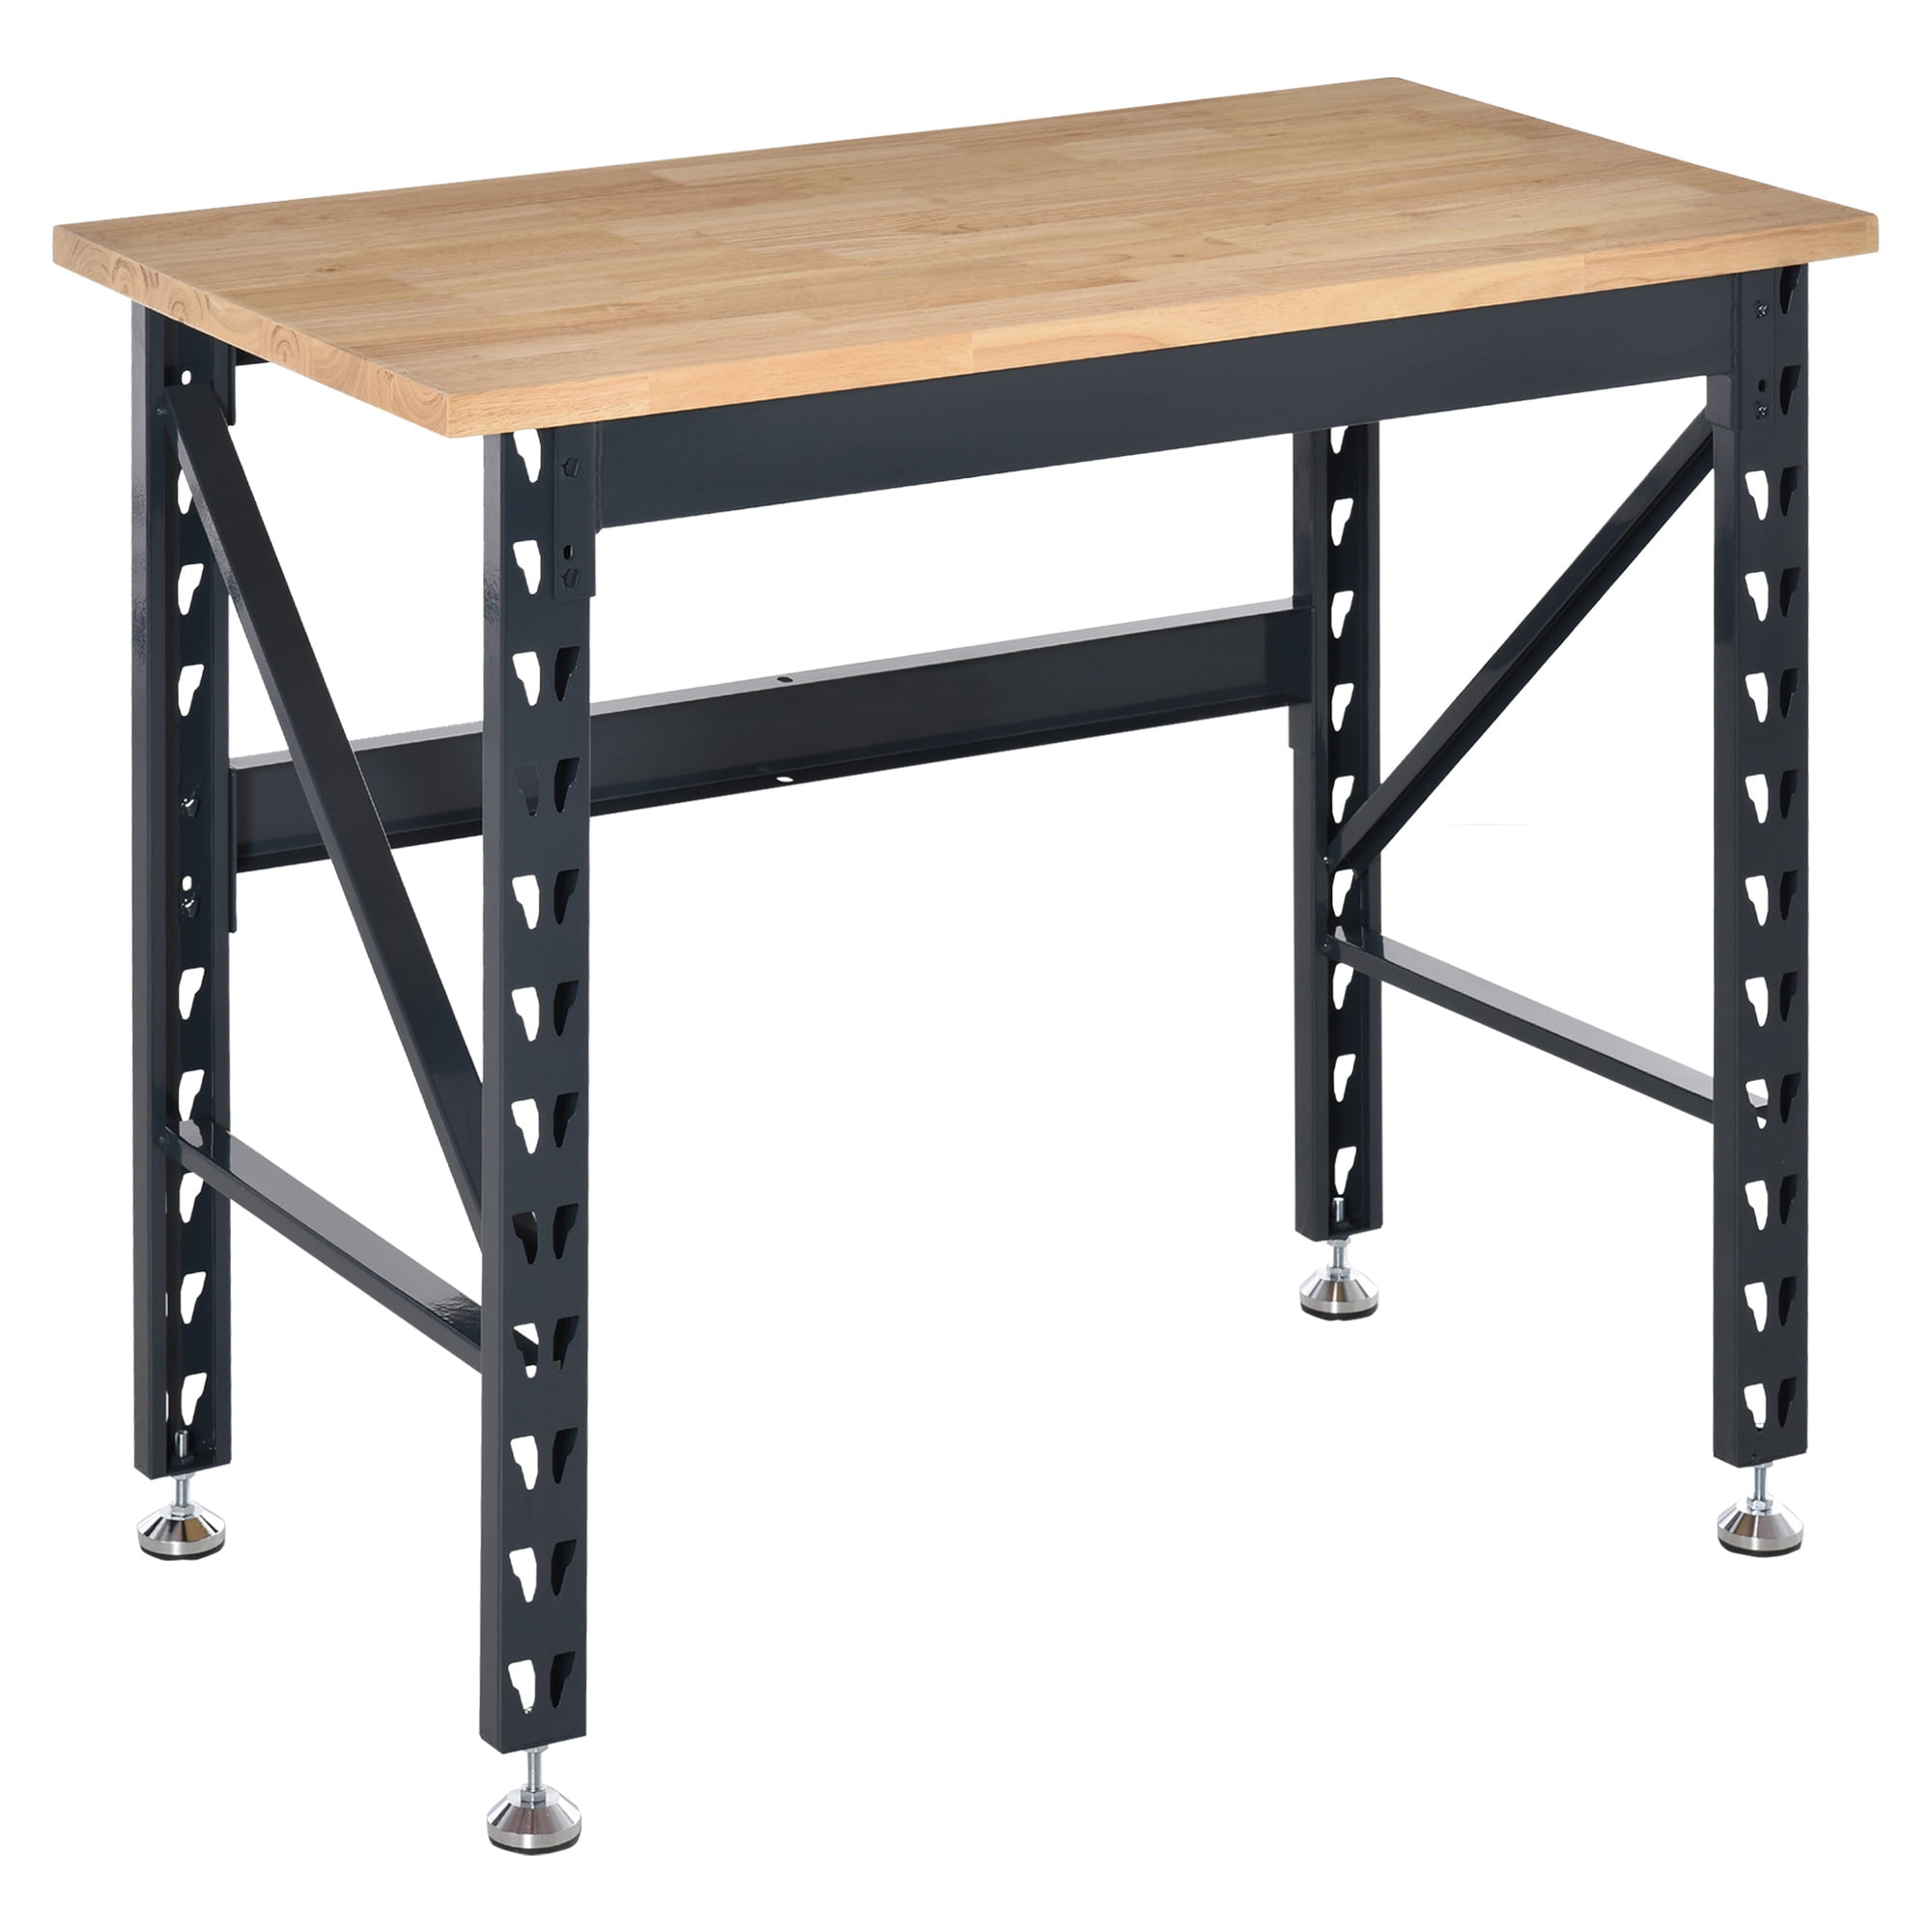 Engineered Wood Workbench Top Zoro Select 4tw87 for sale online 60x30 In 